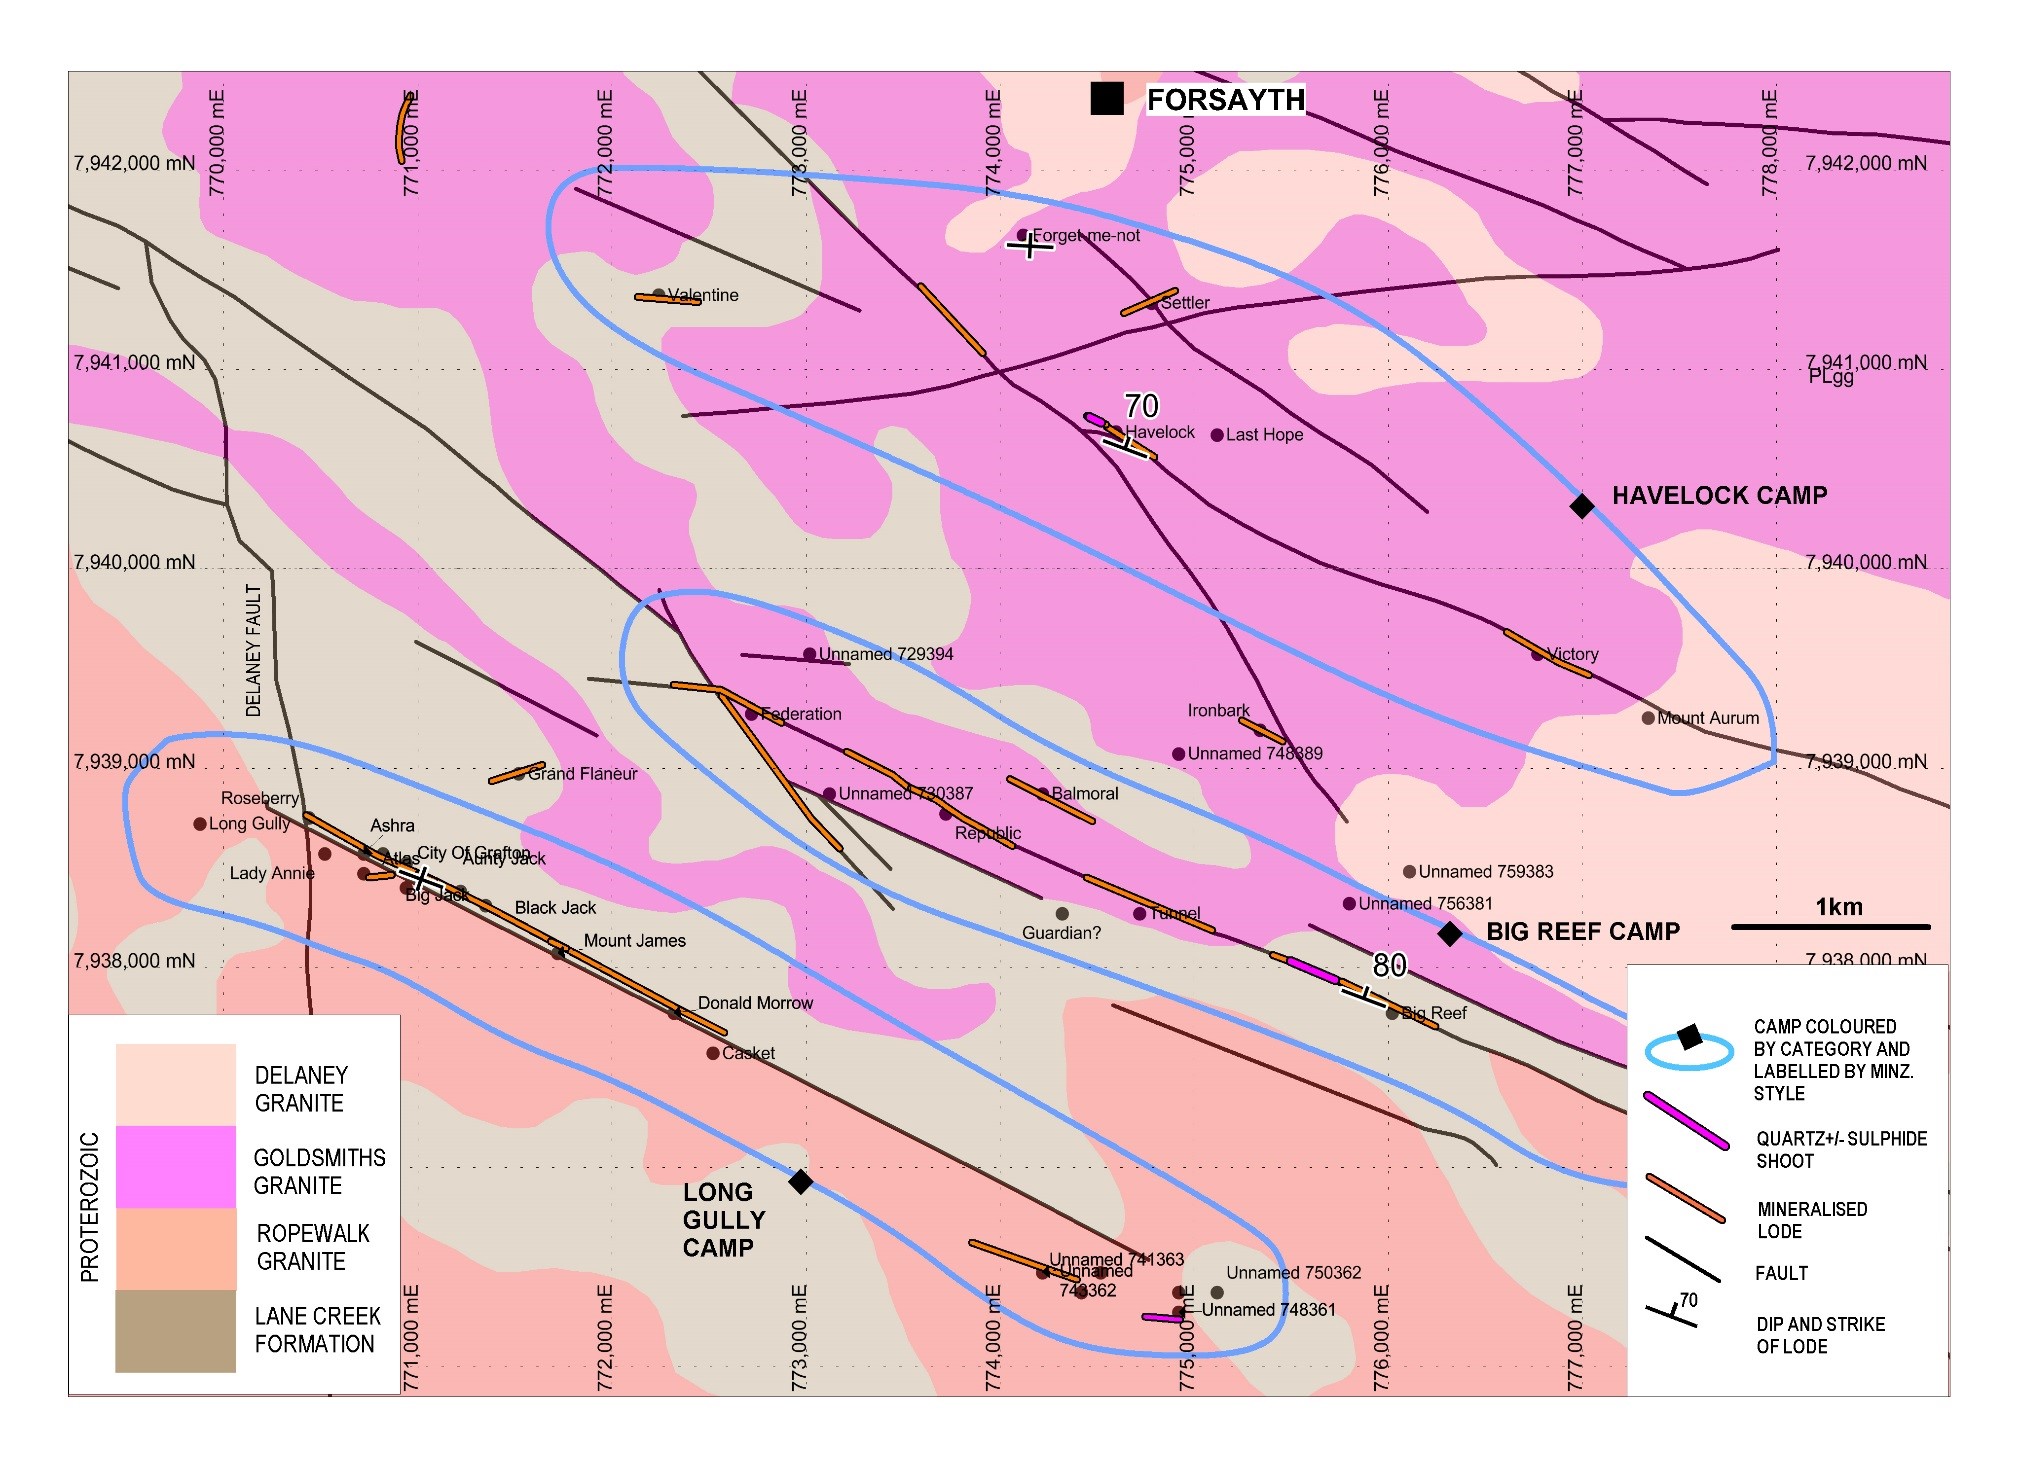 Figure 13: Map of major Devonian Plutonic Lode style camps near Forsayth. Shows major northwest trending structures that host mineralised lodes at intervals along their length. In places higher grade quartz-sulphide shoots are present within the lodes.